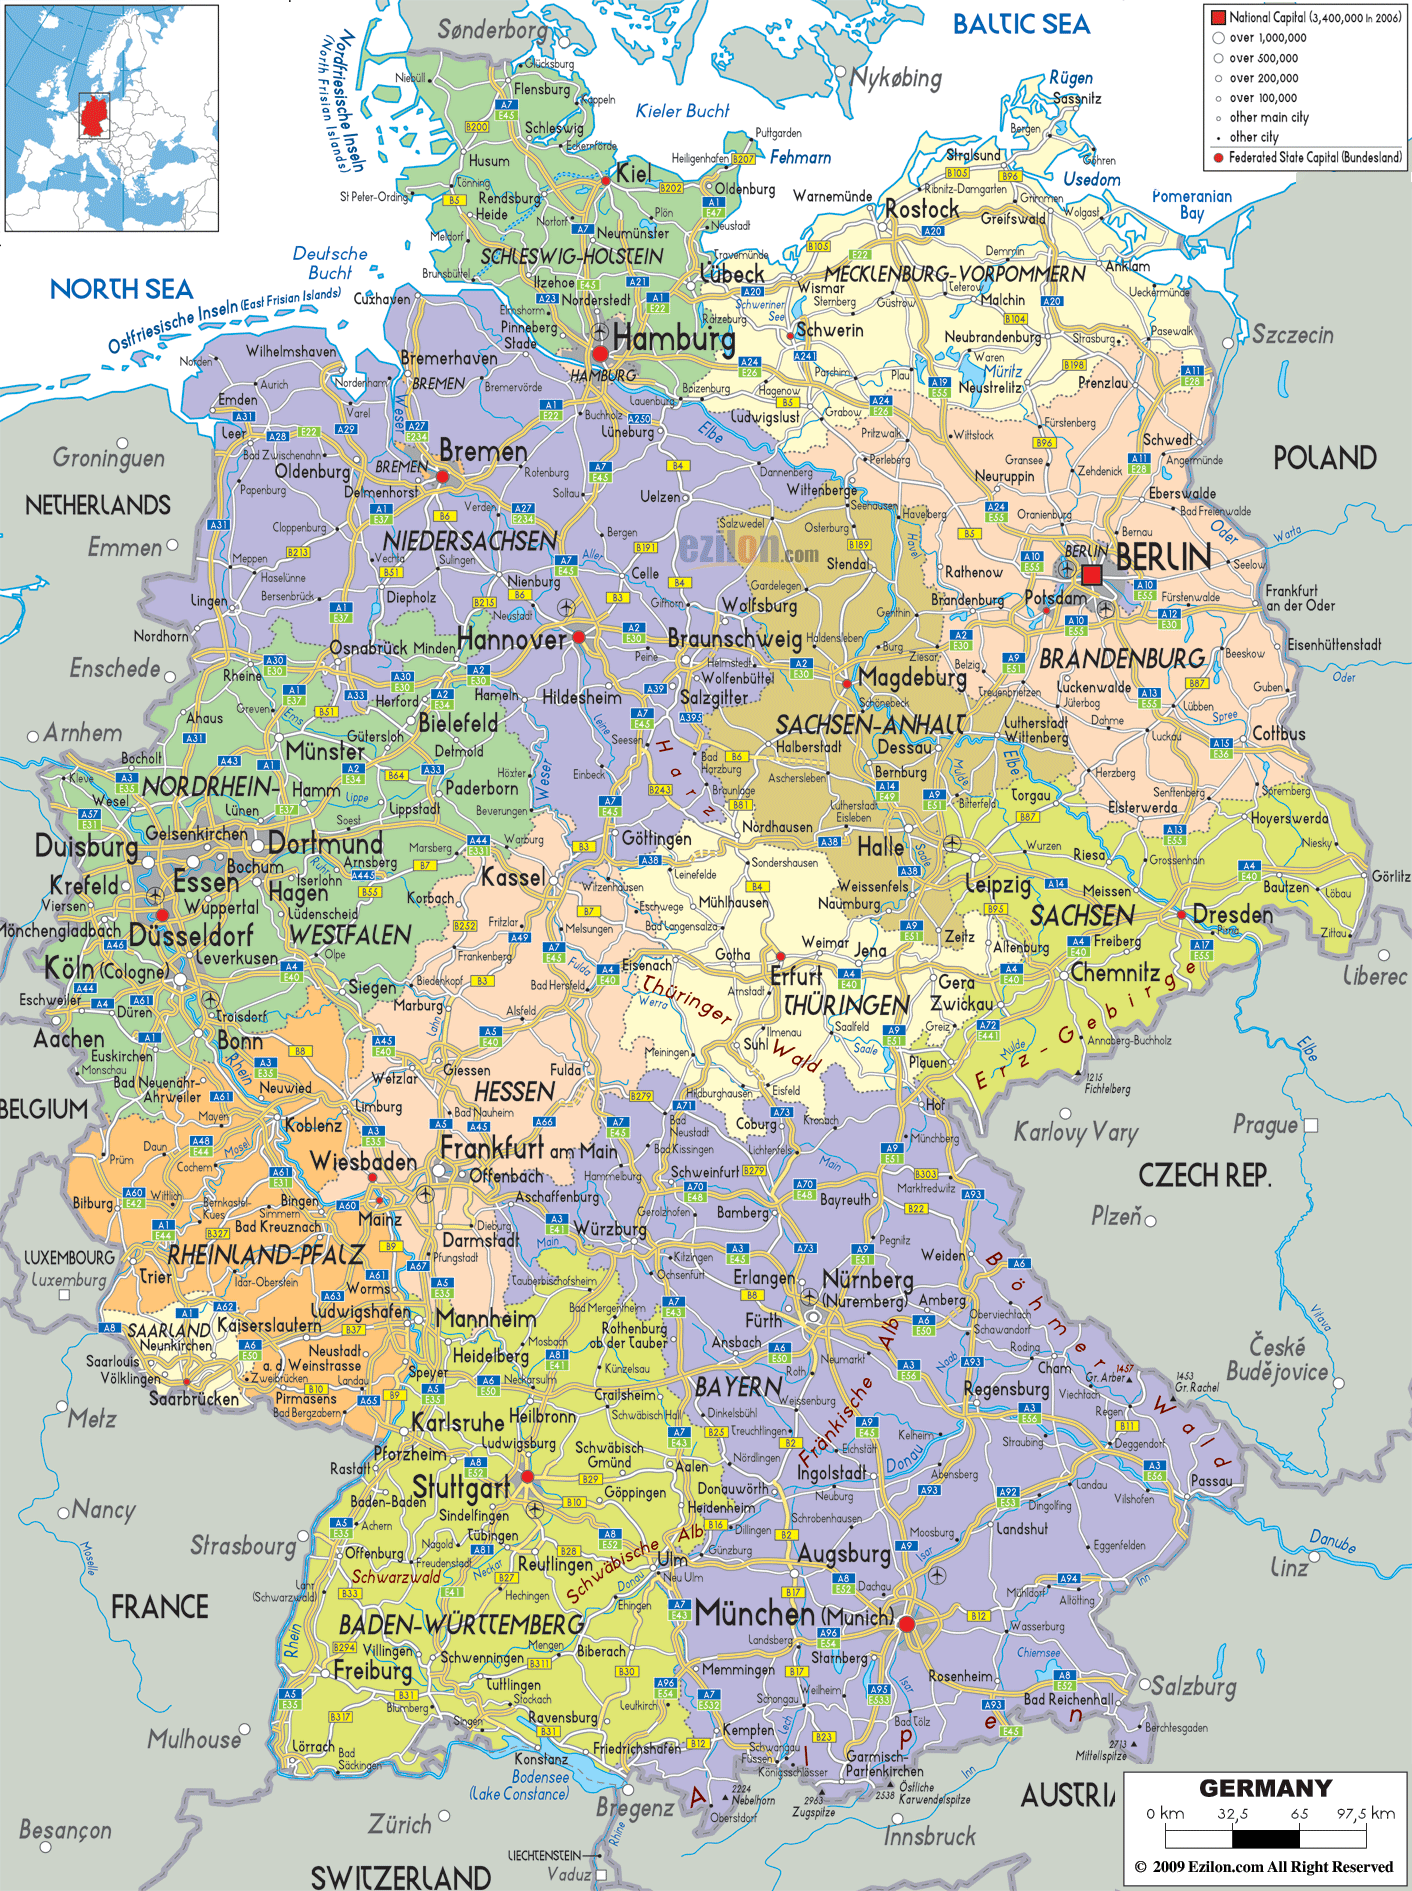 GERMANY MAP - Map Of World